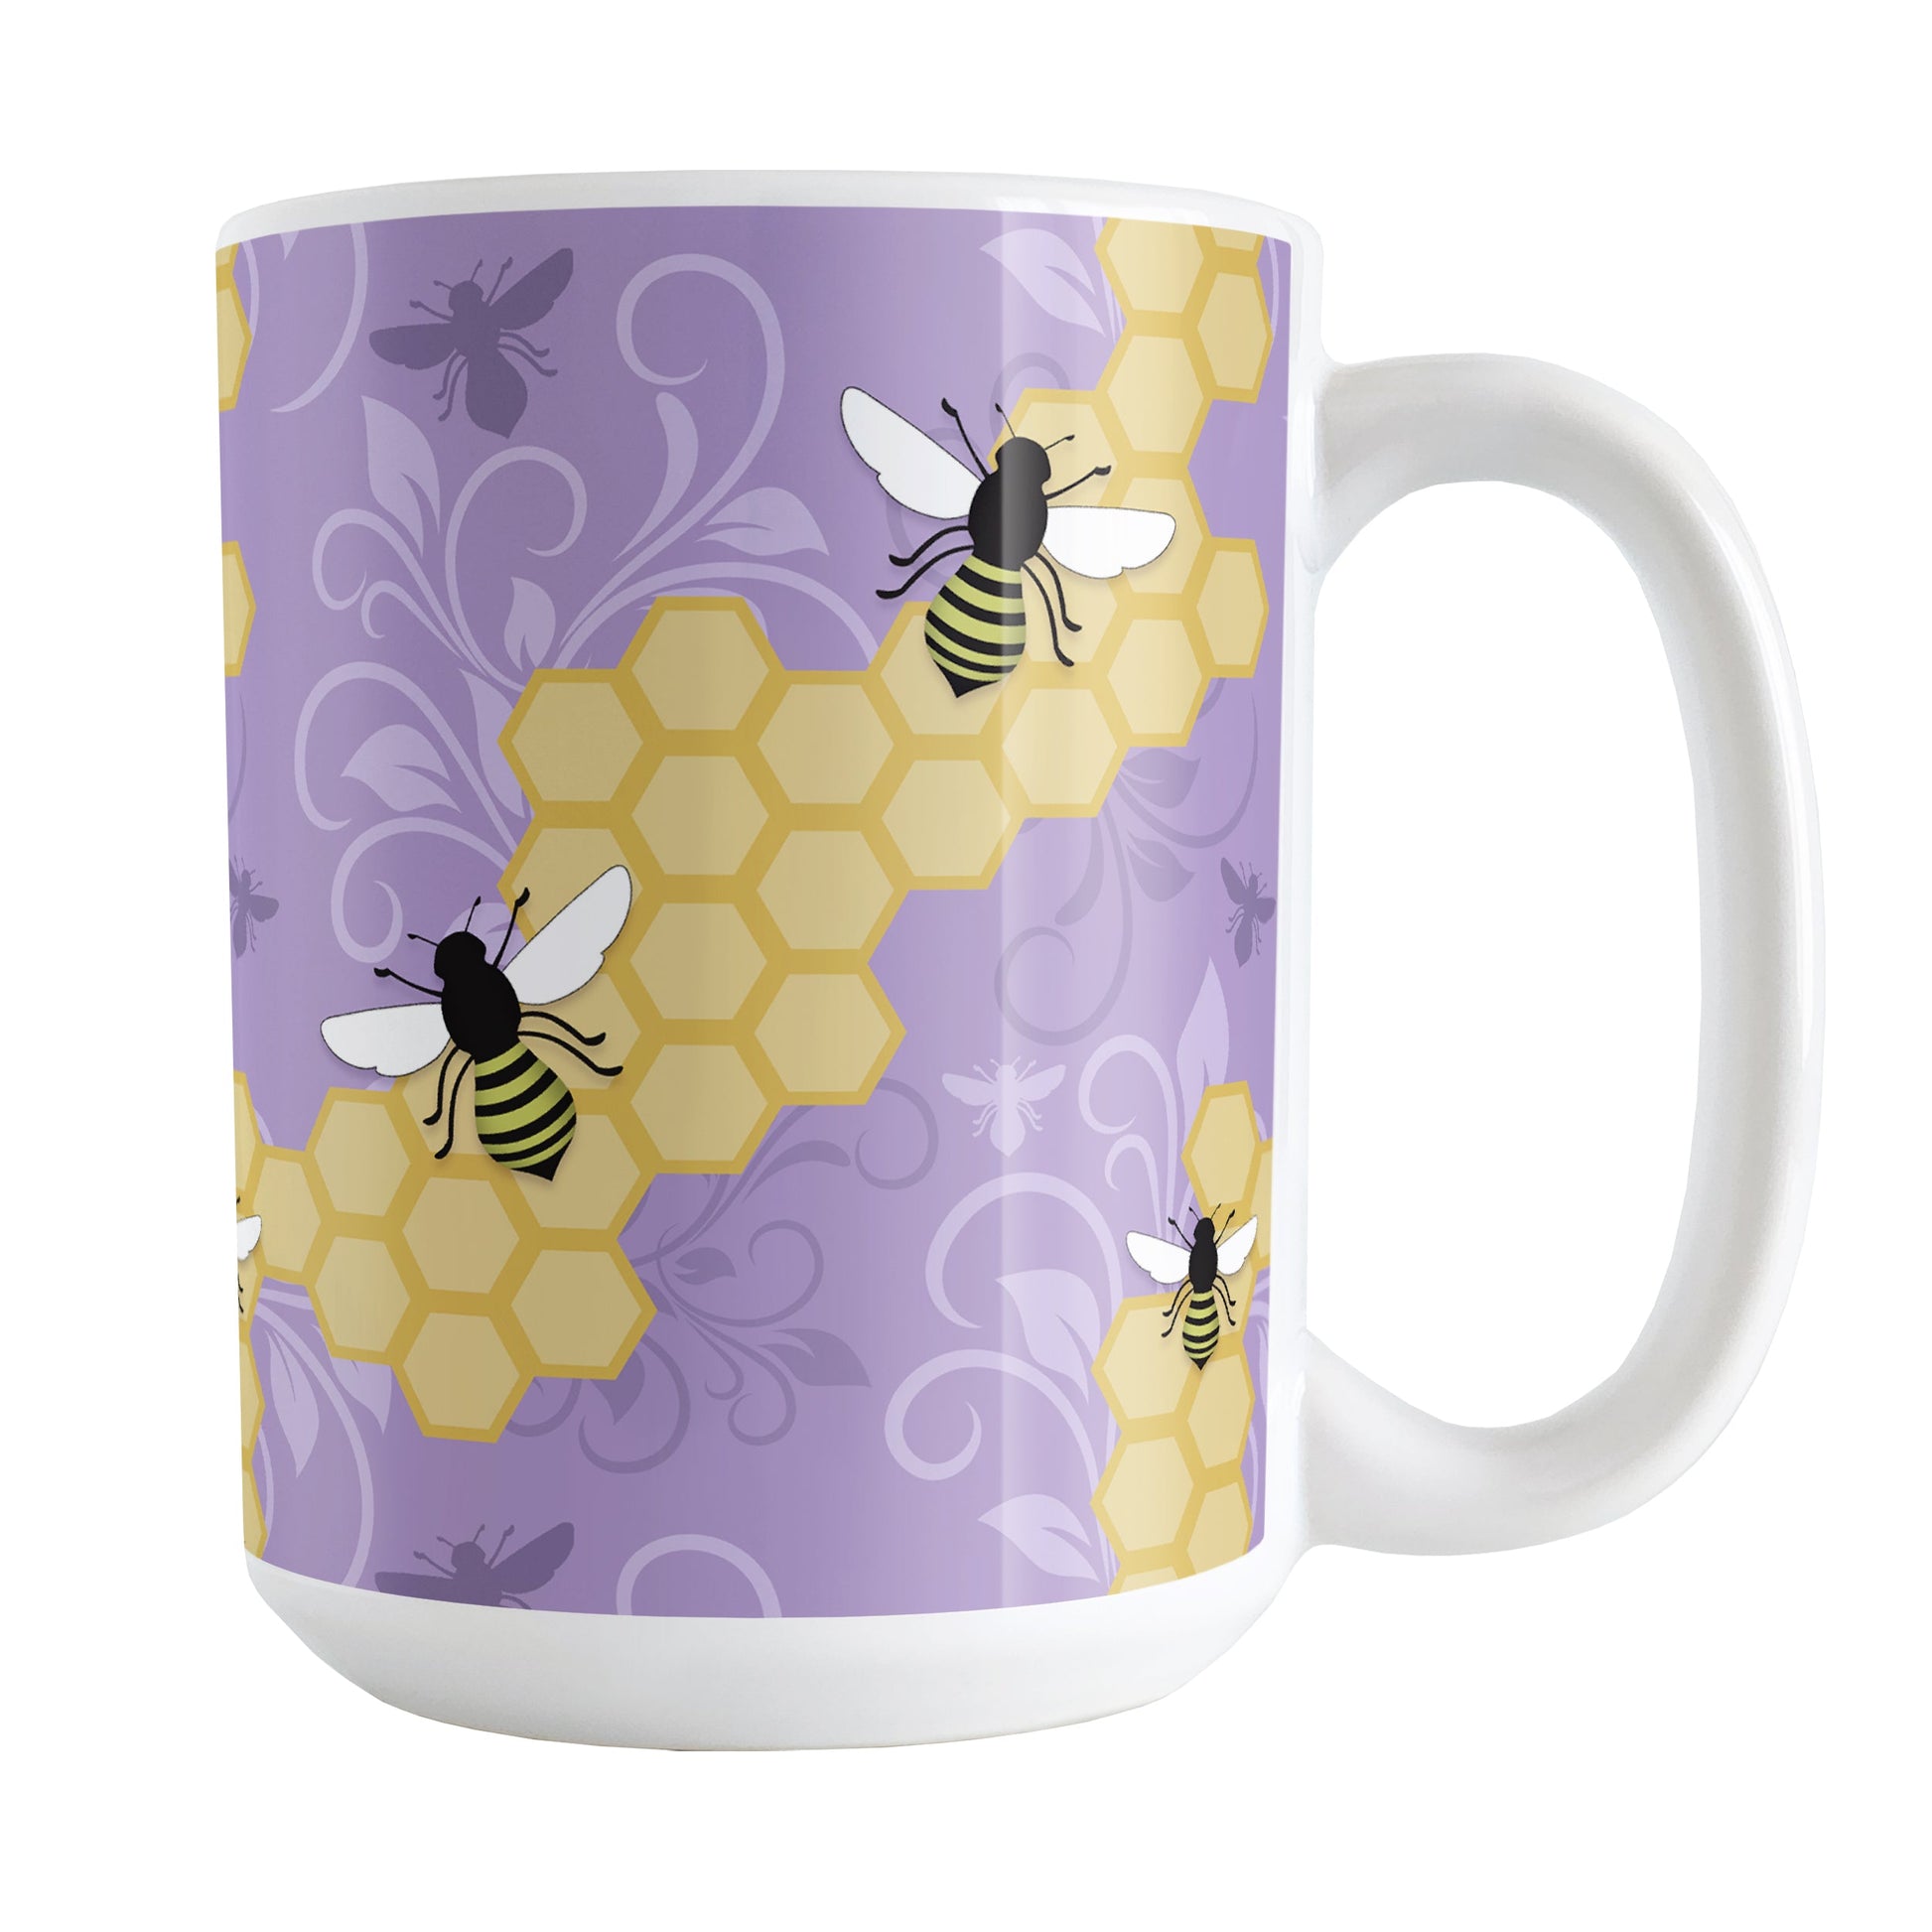 Purple Honeycomb Bee Mug (15oz) at Amy's Coffee Mugs. A ceramic coffee mug designed with a pattern of black and yellow bees on honeycomb lines over a purple flourish background that wraps around the mug to the handle.